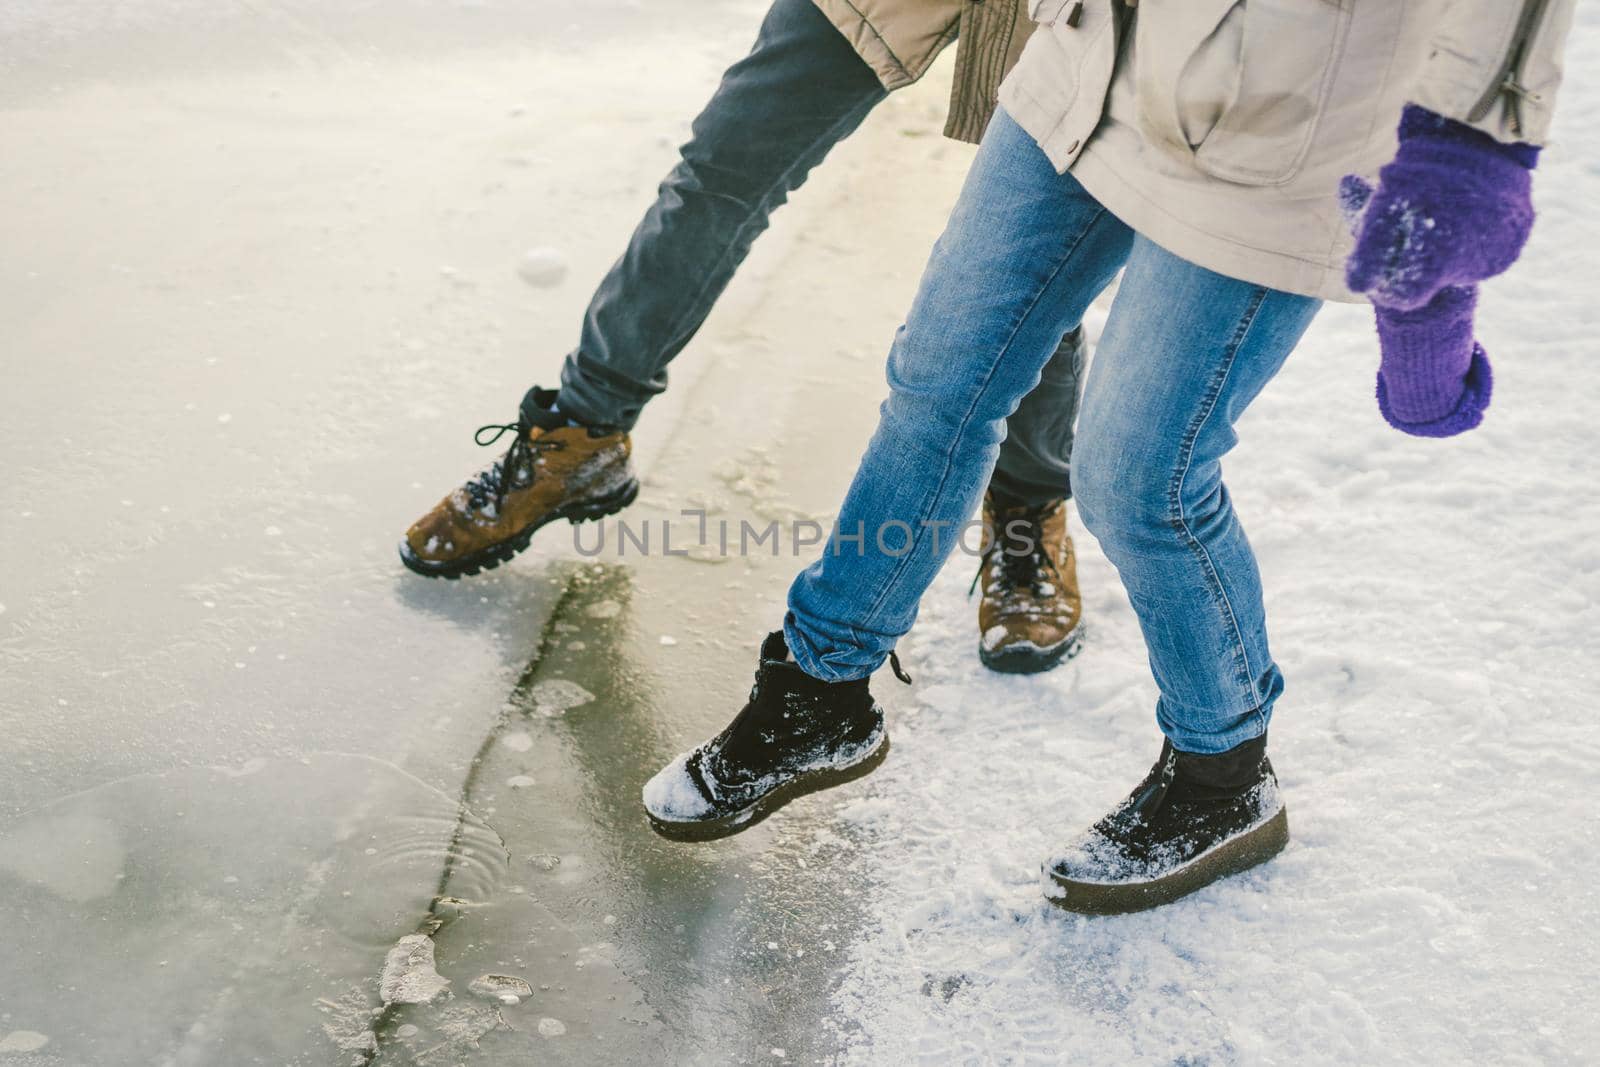 Trying the danger of the foot, testing the thin ice near the shore. A pair of lovers walk with a walk along a frozen lake to press foot on the ice by Tomashevska